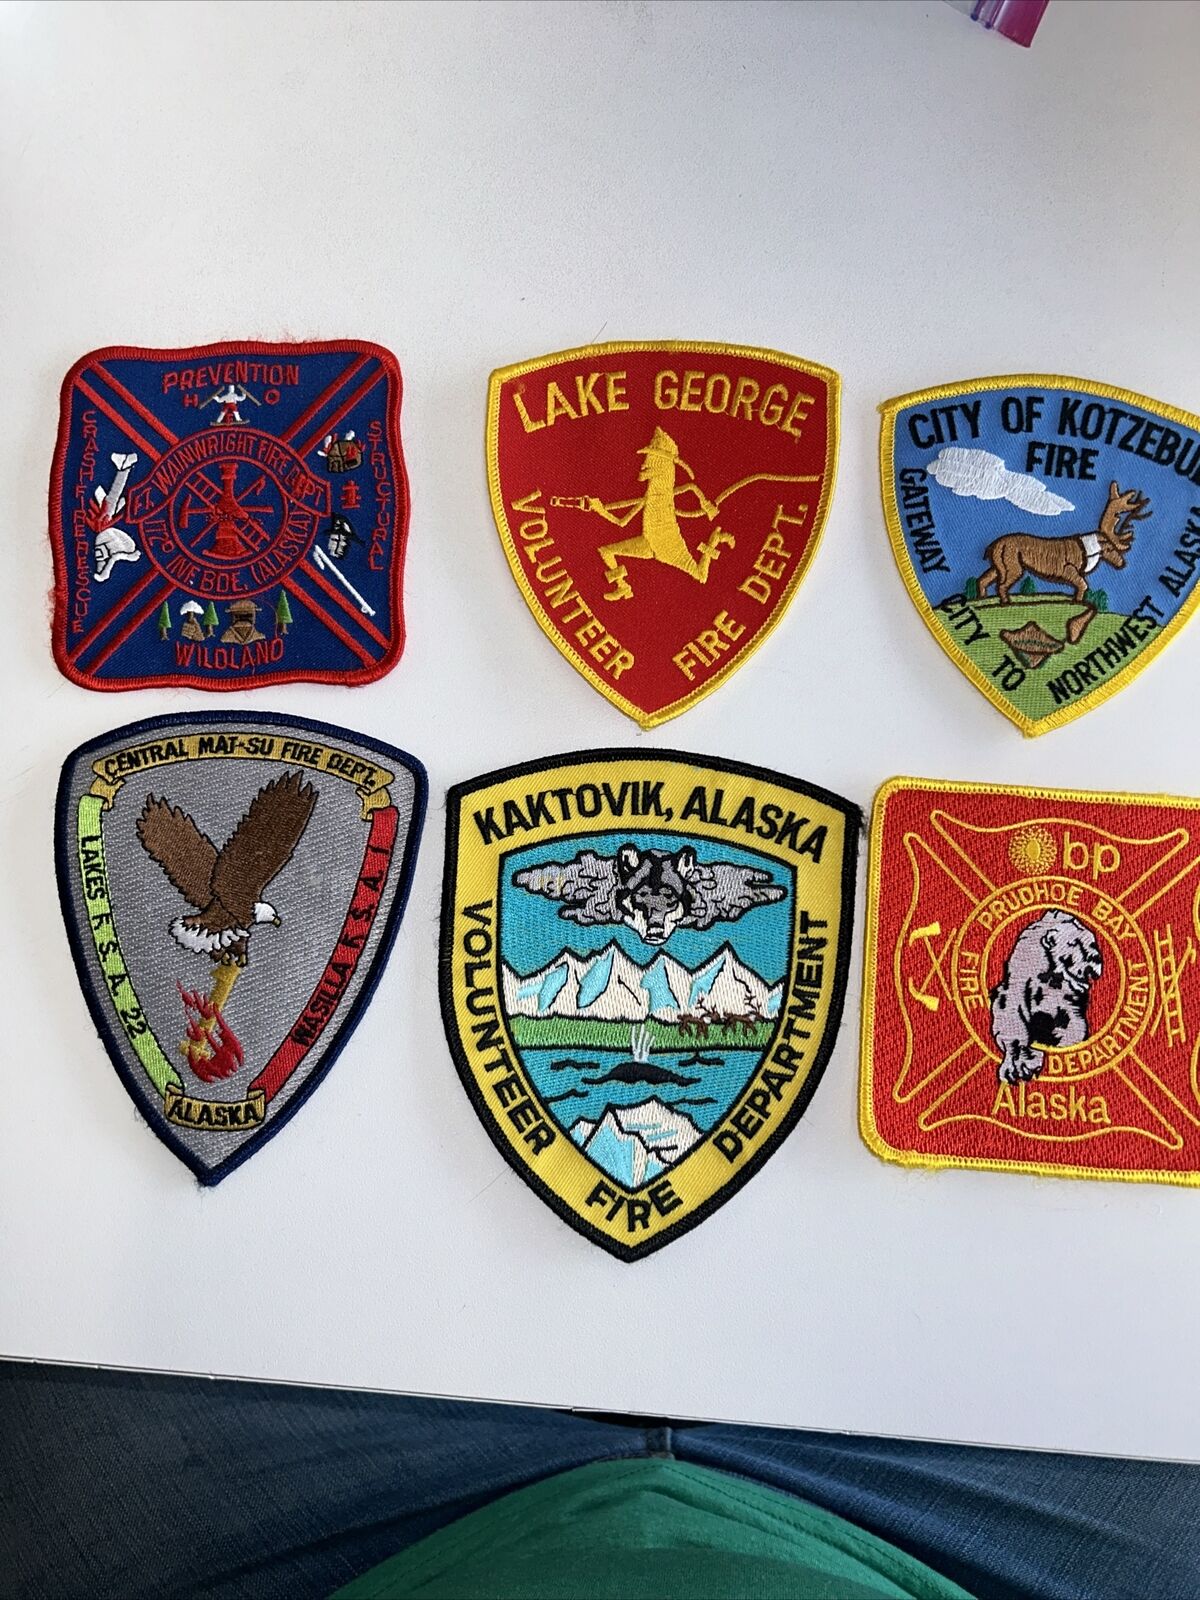 LOT OF 6 Alaska City Patches Fire Department Kotzebue Lake George Prudhue Bay